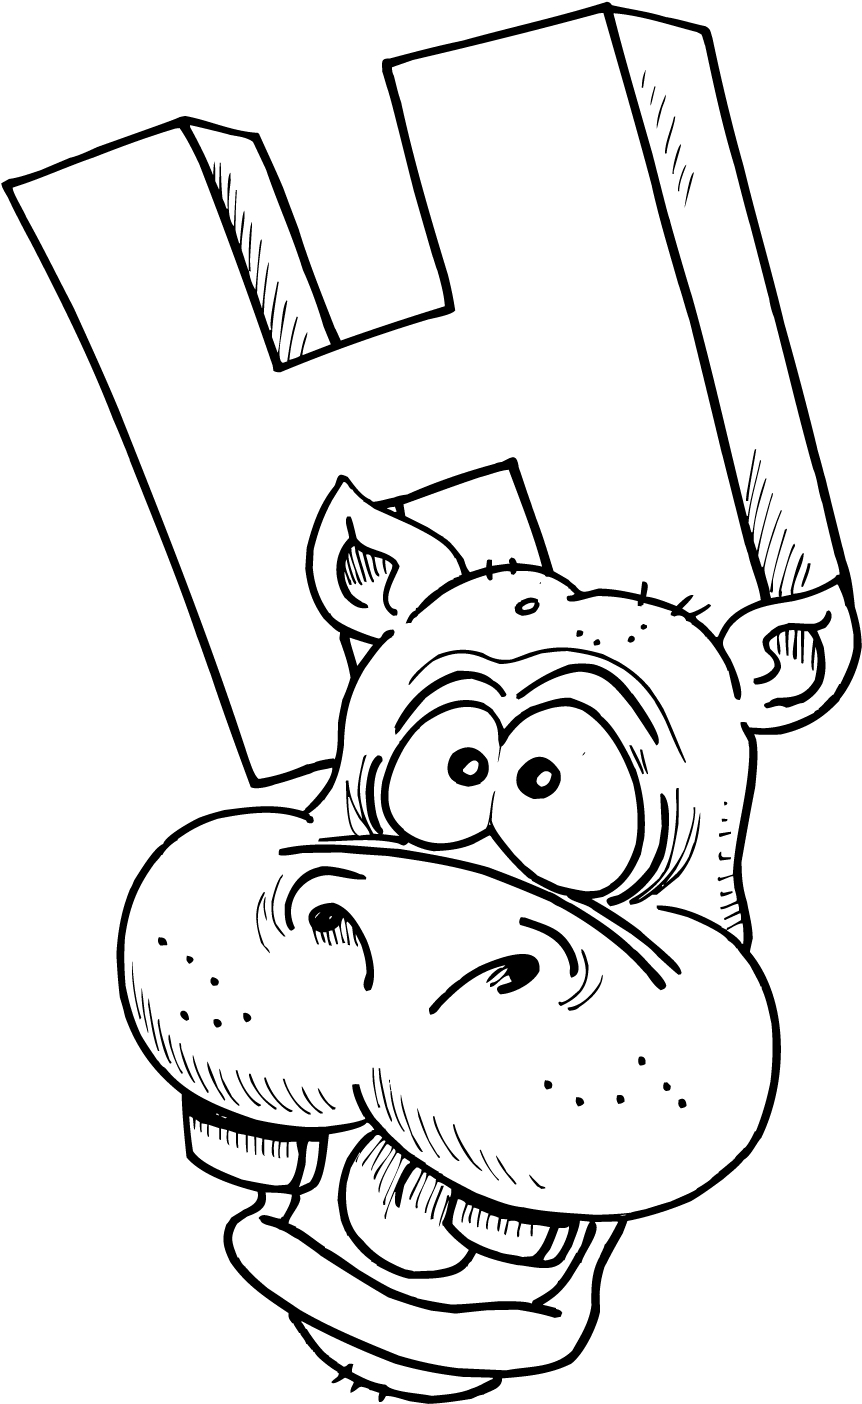 colouring page of letter h with a hippo - Coloring Point